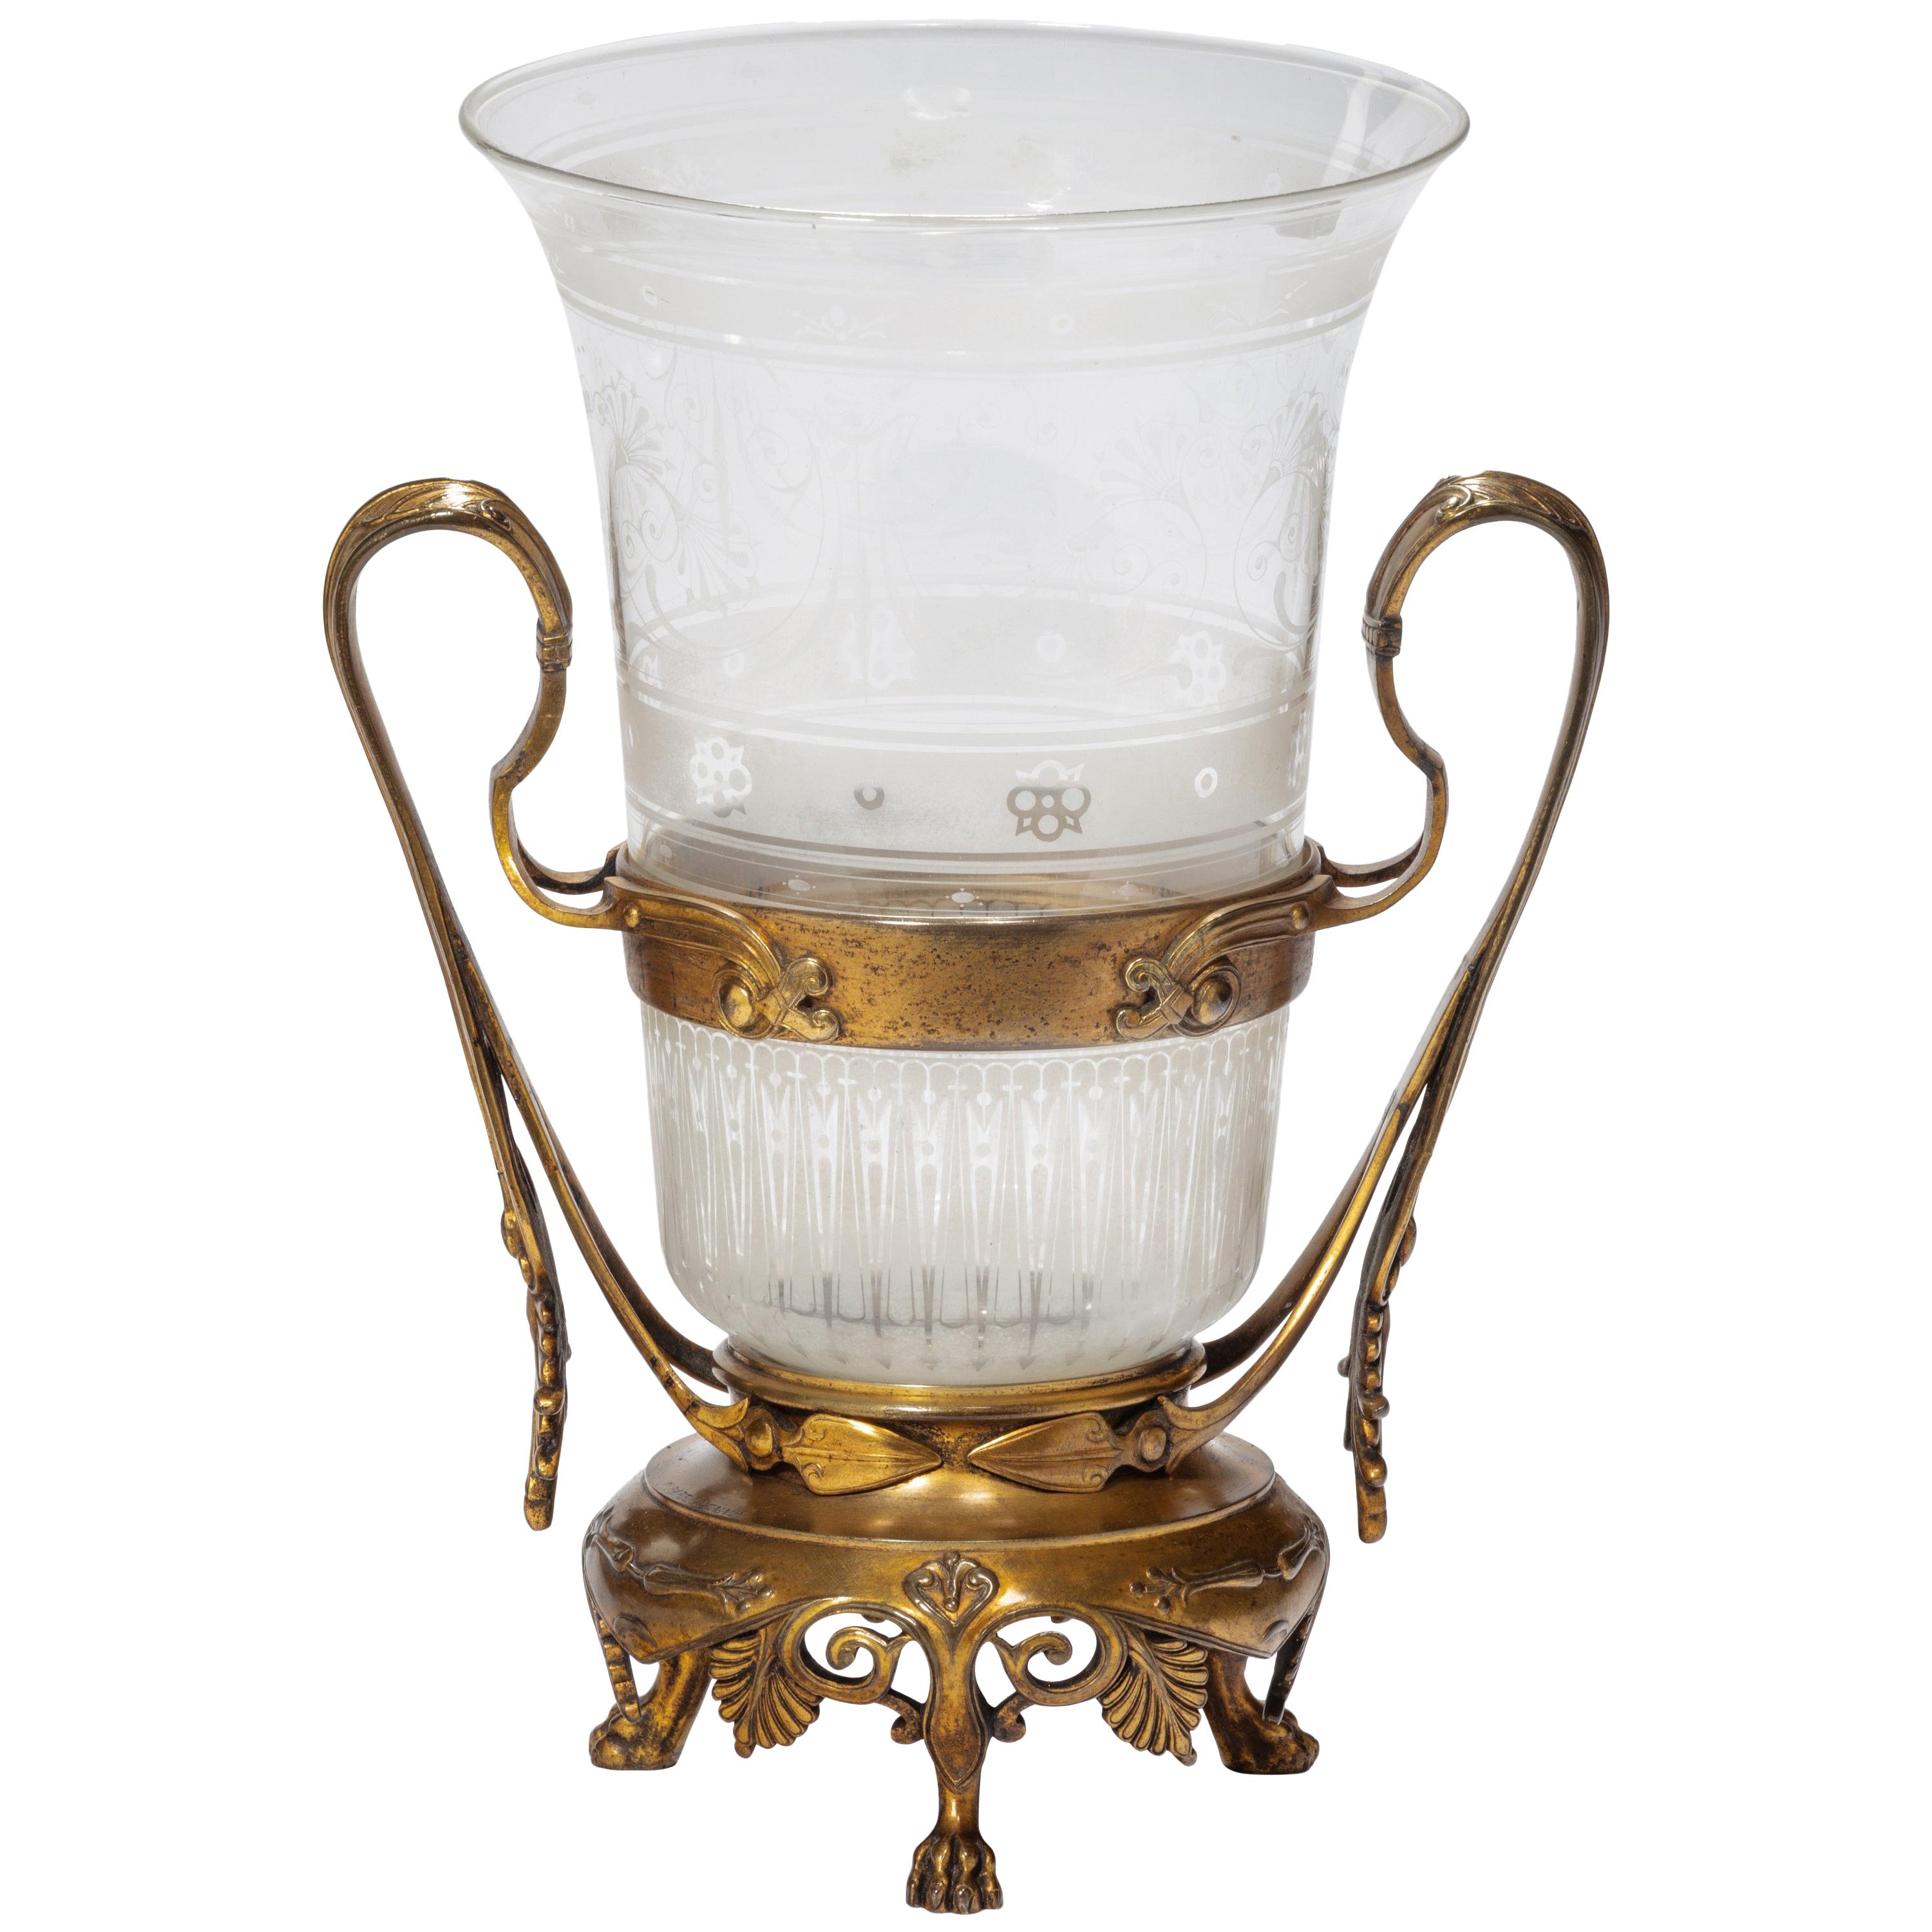 Glass and Ormolu Vase by the Barbedienne Foundry